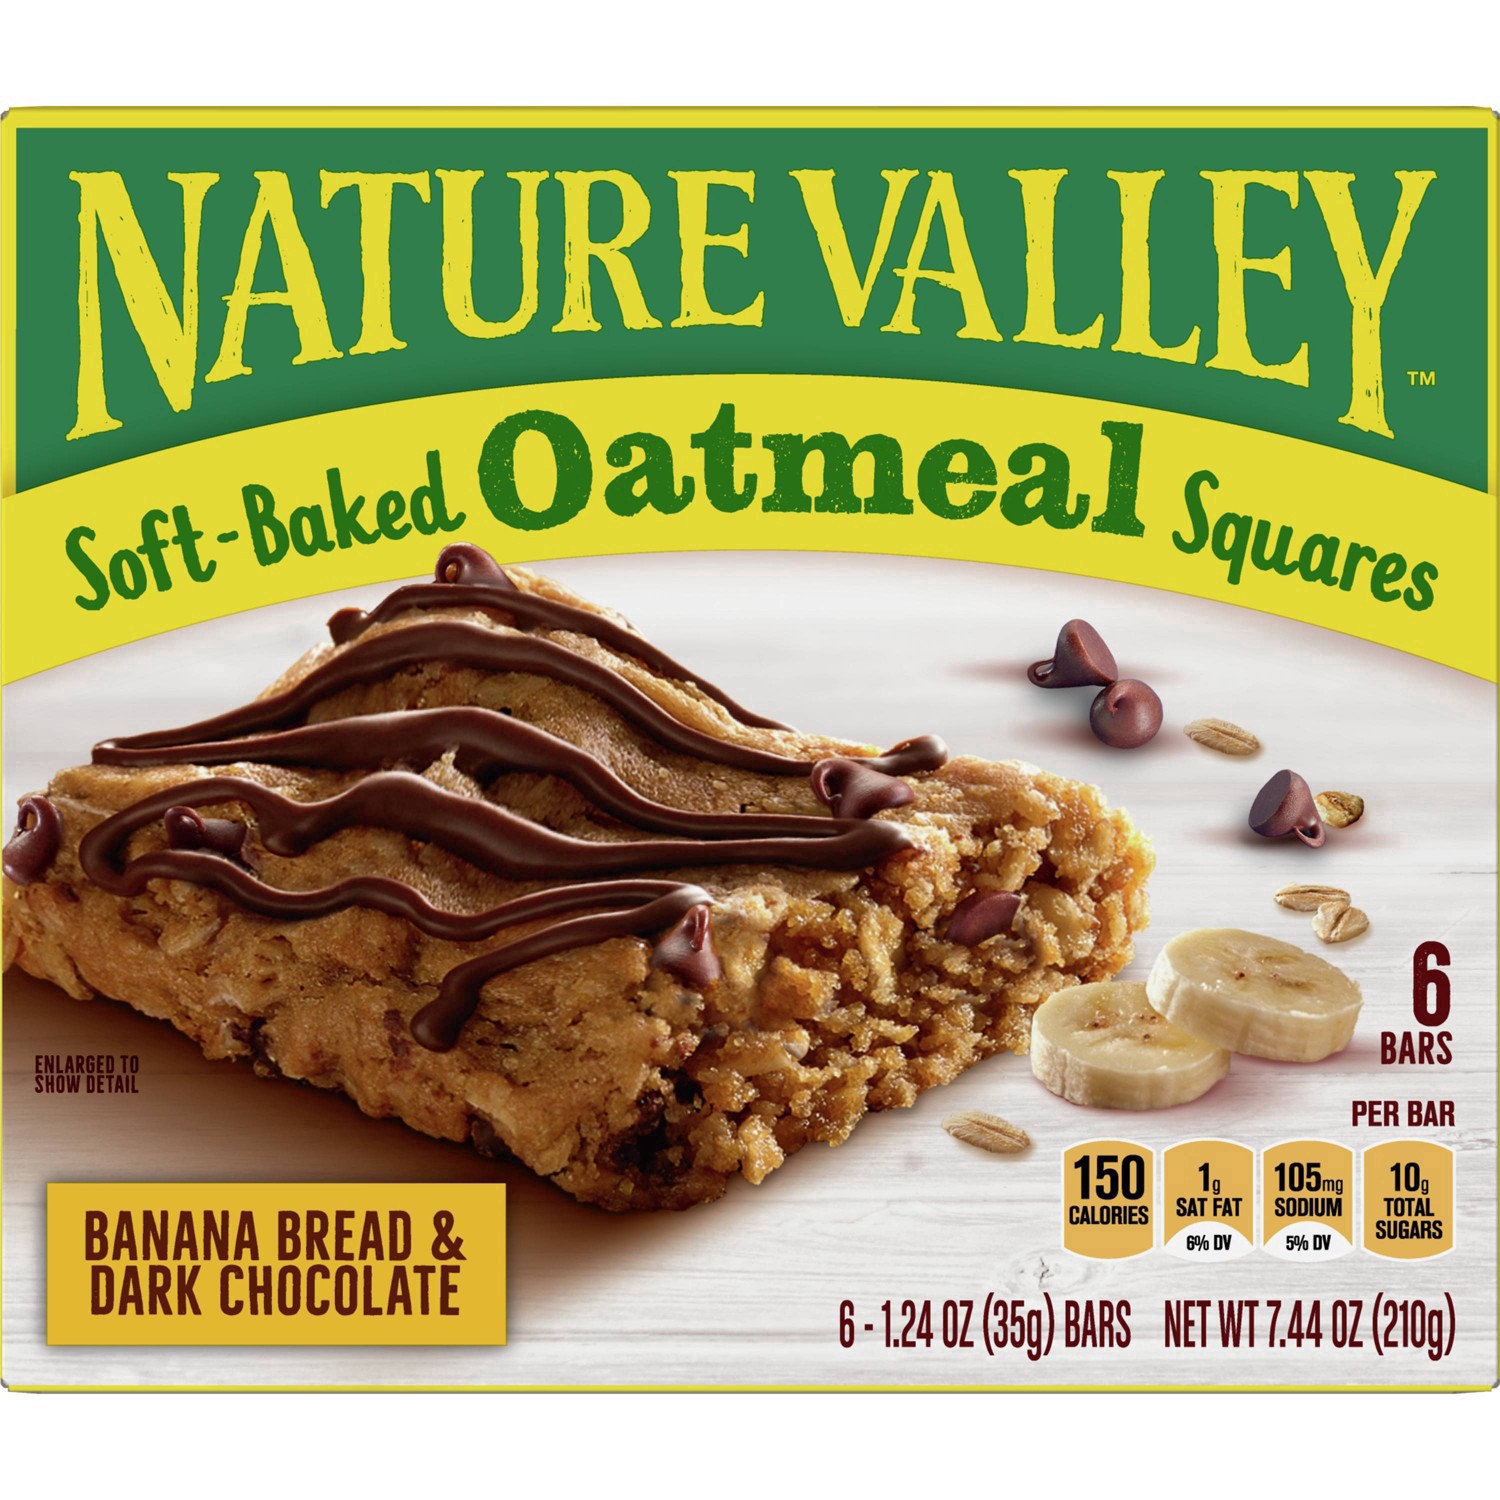 slide 53 of 101, Nature Valley Soft-Baked Oatmeal Squares, Banana Bread & Dark Chocolate, 6 ct, 6 ct